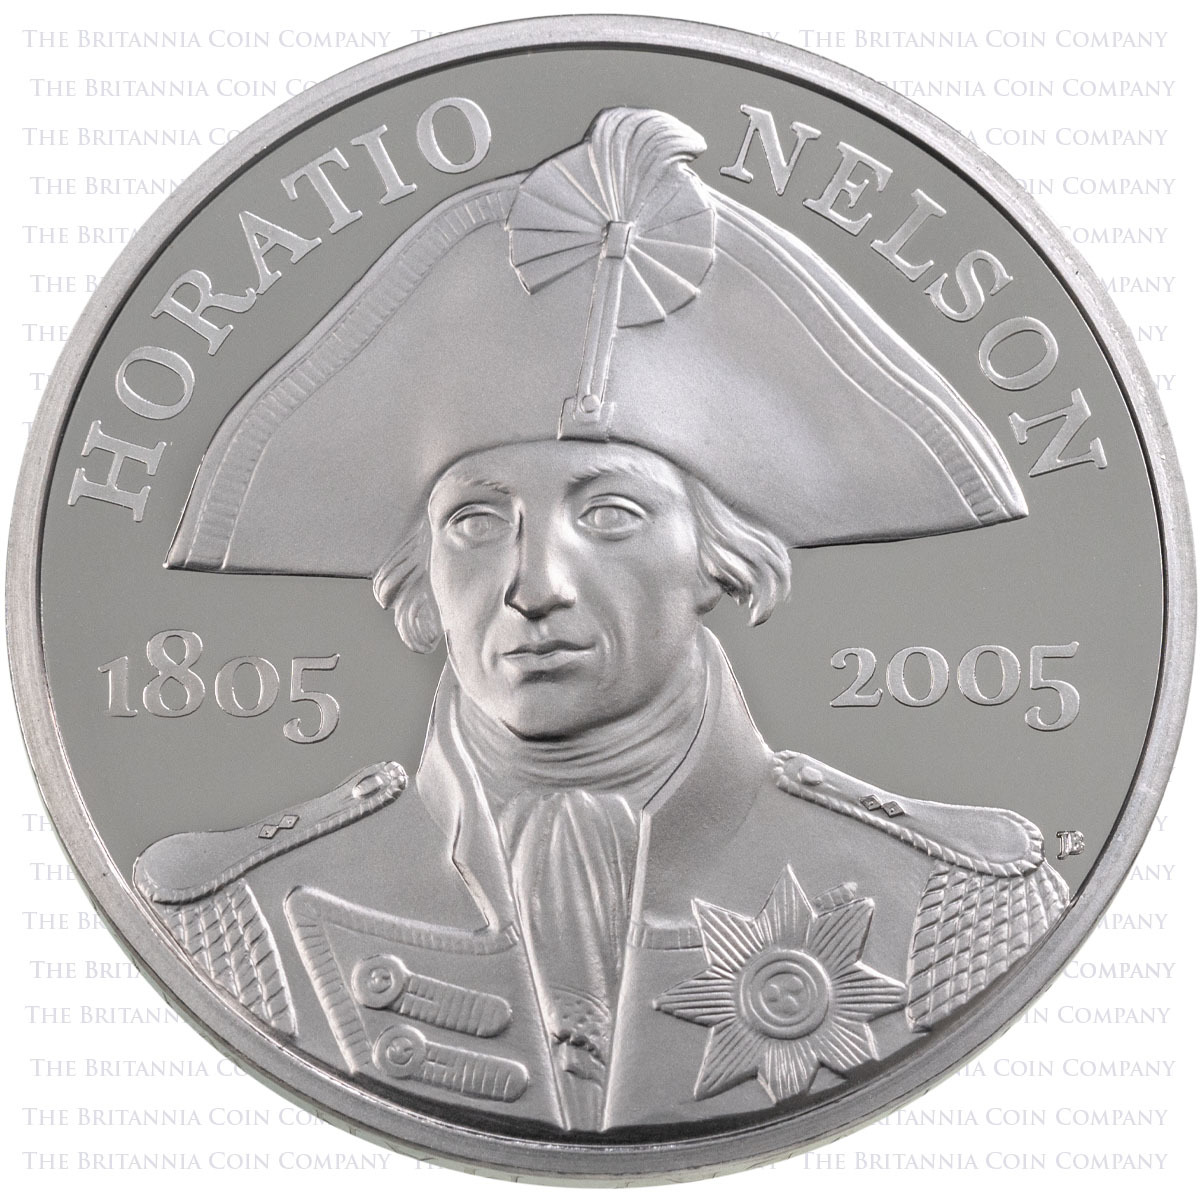 2005 Death Of Horatio Nelson 200th Anniversary Five Pound Crown Piedfort Platinum Proof Coin Reverse